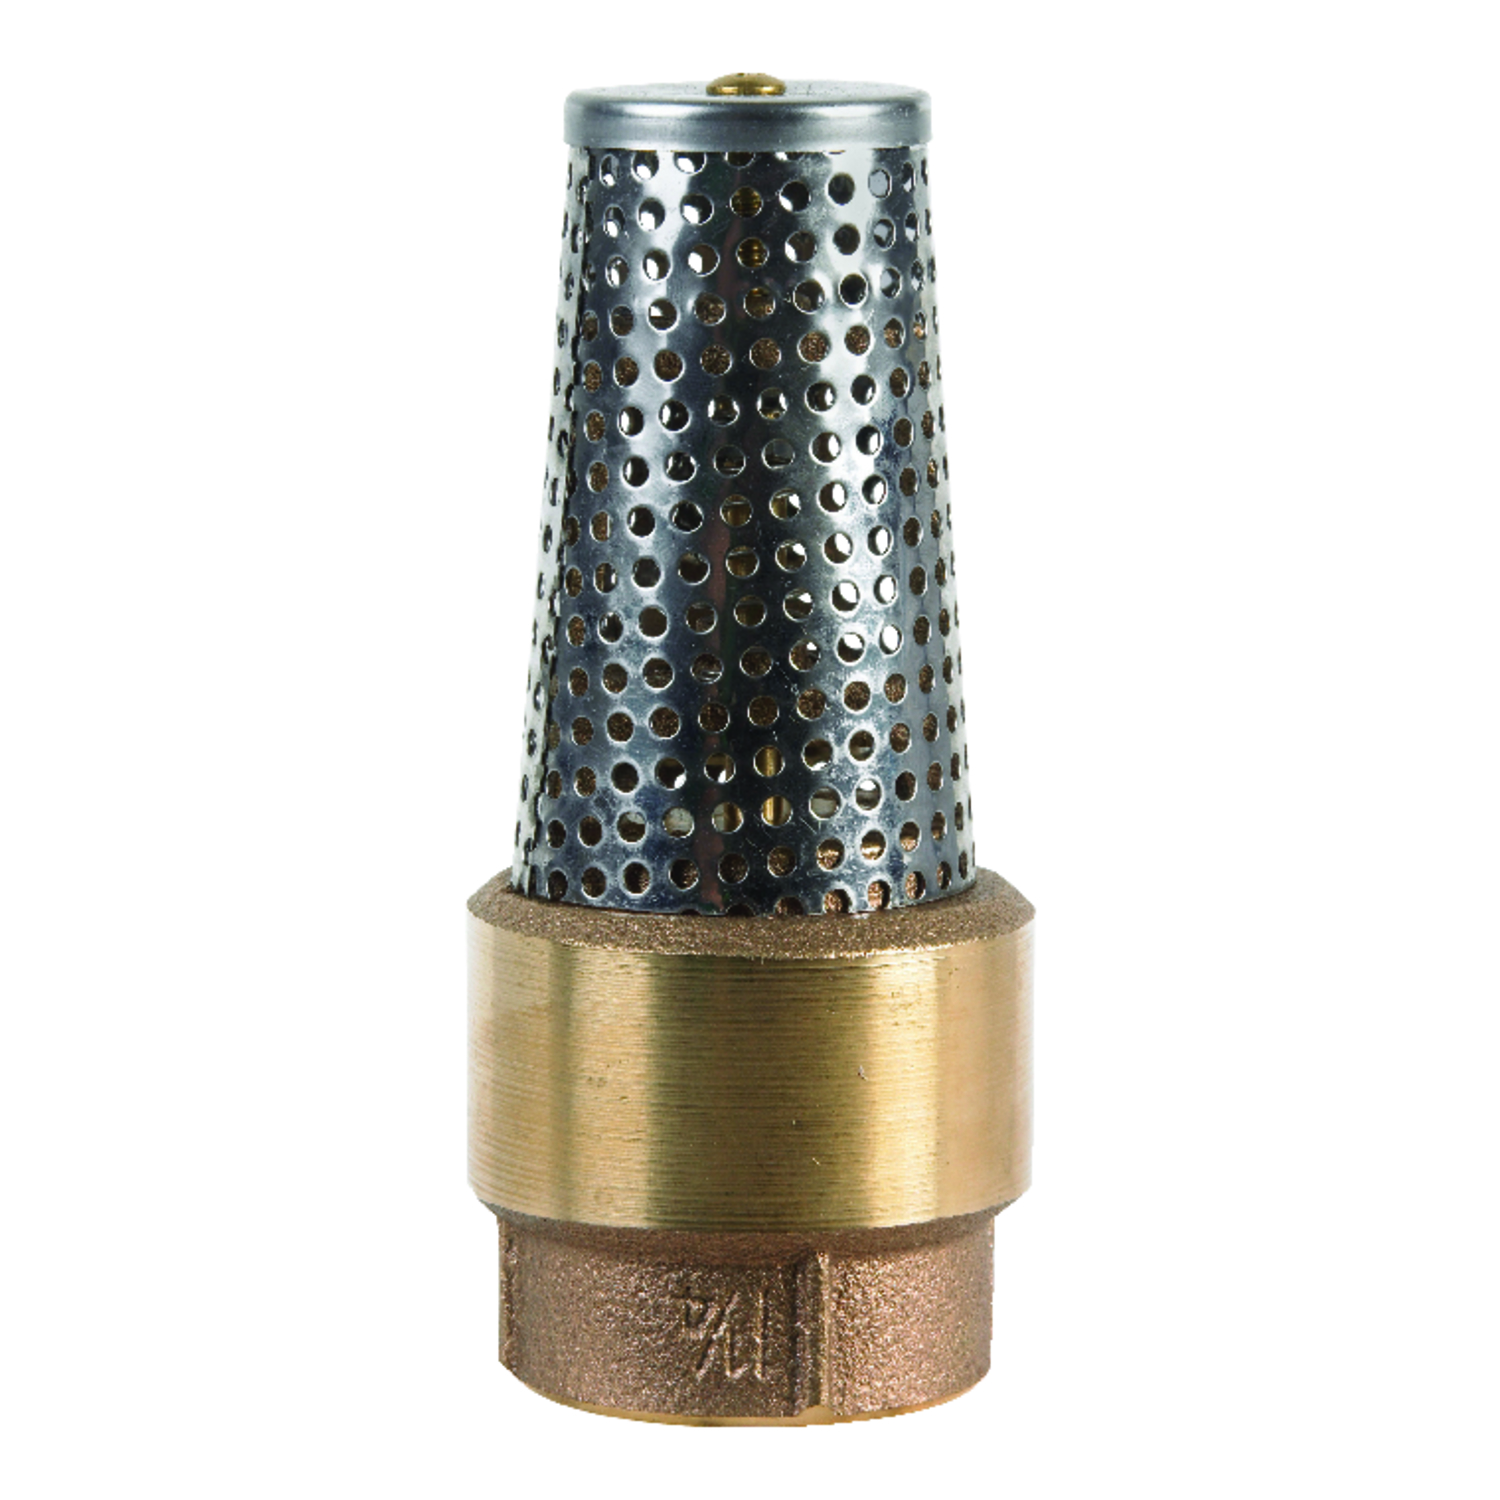 Photos - Other sanitary accessories Campbell 1-1/4 in. D X 1-1/4 in. D FNPT x FNPT Brass Foot Valve FV-5TLF